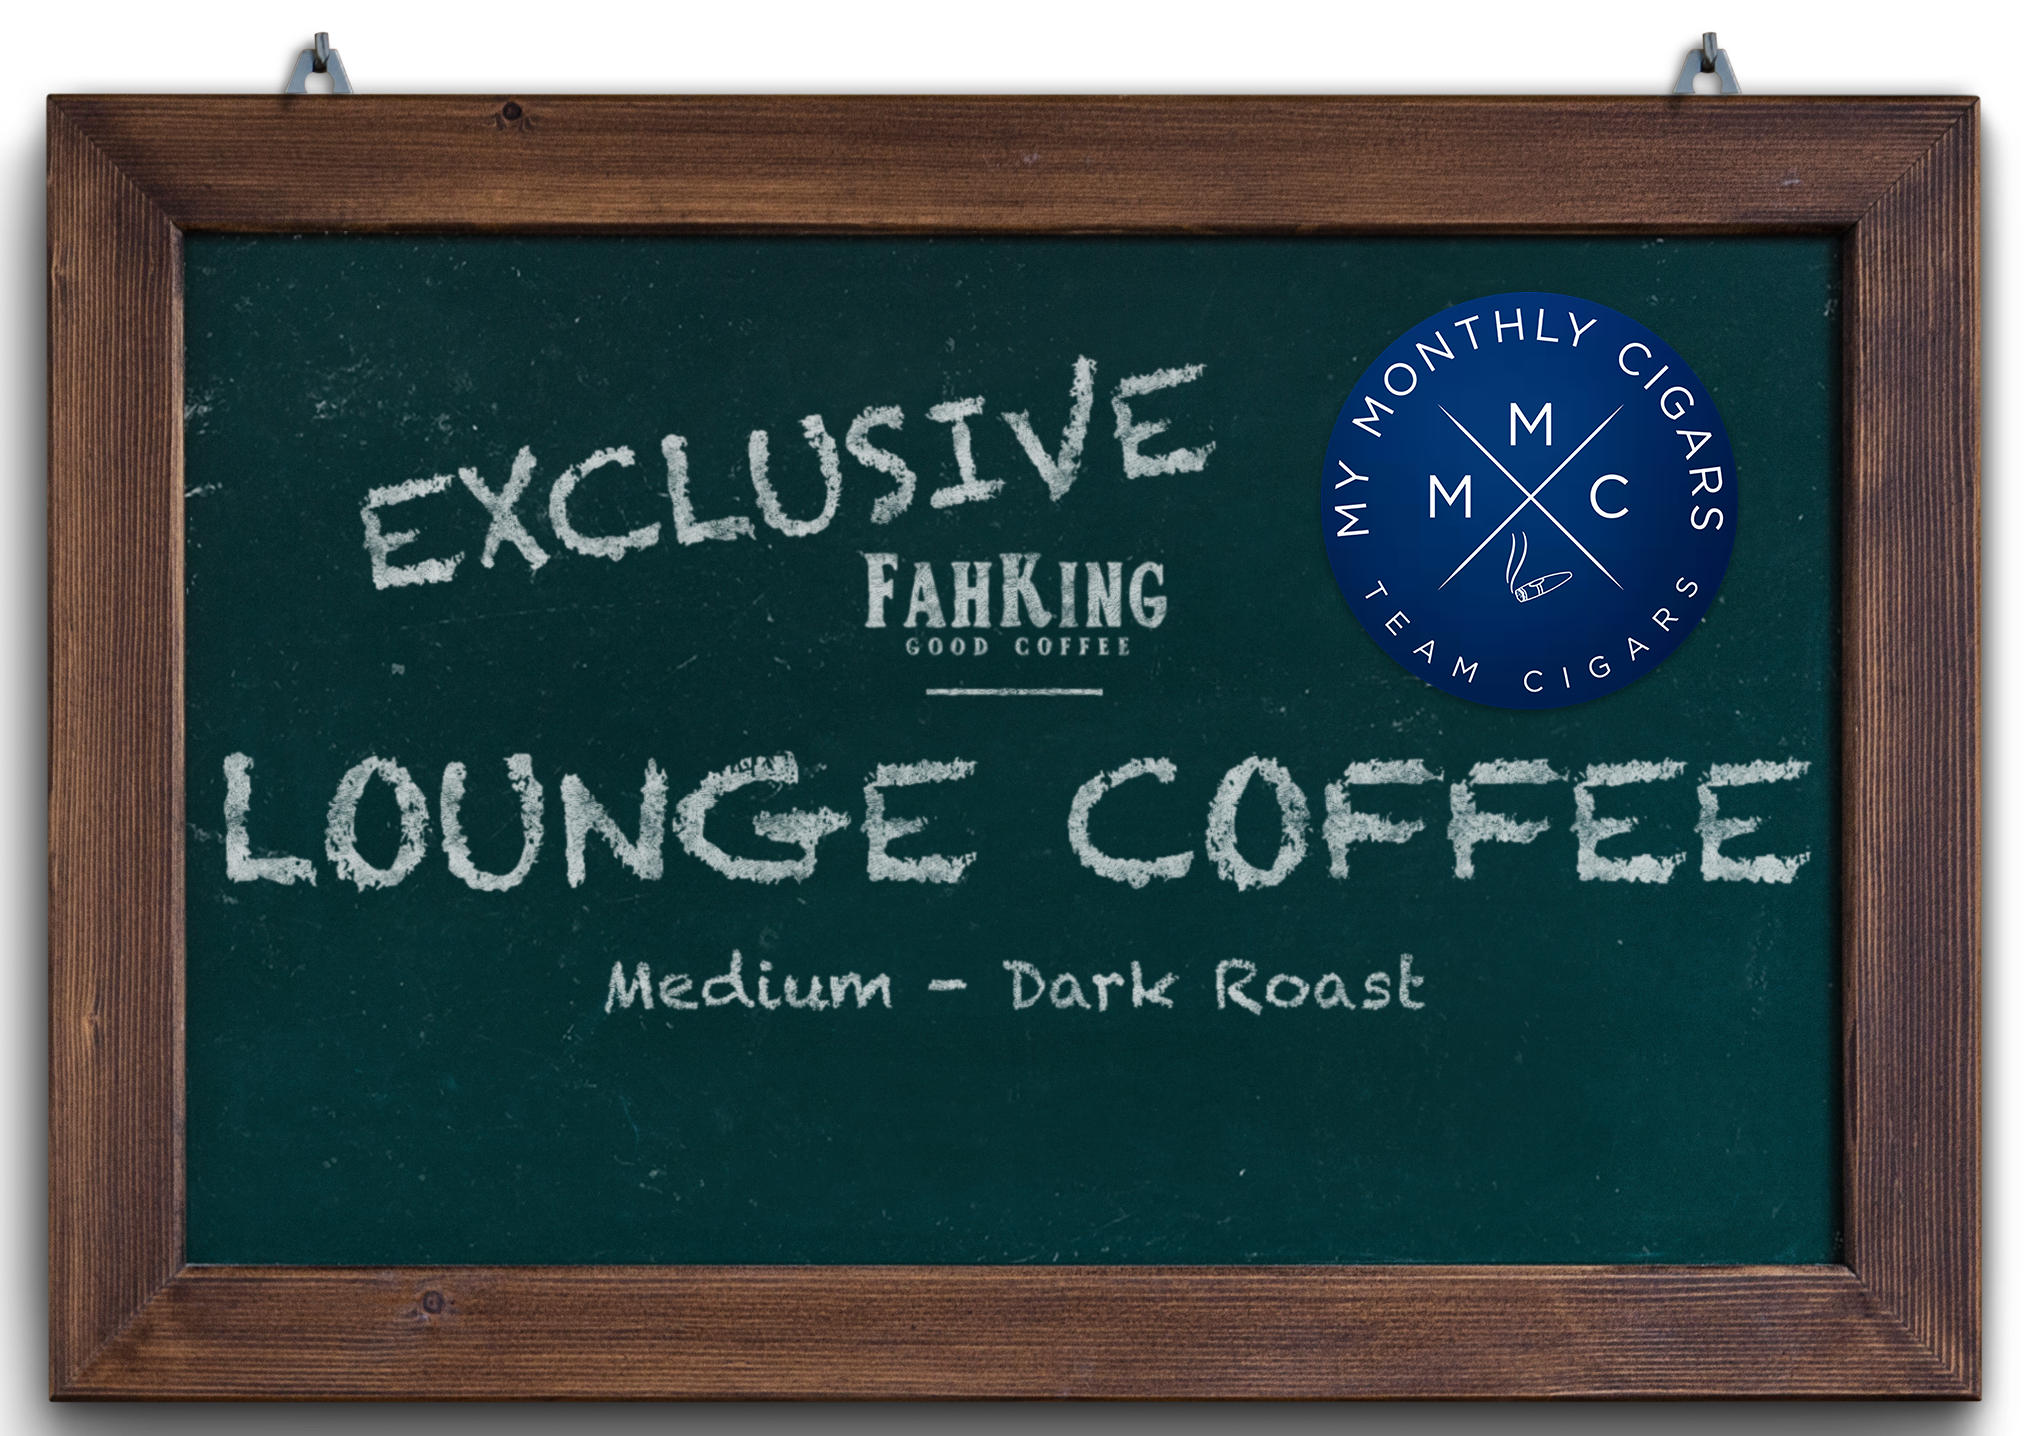 Loung Coffee - Fah King Good Coffee - My Monthly Cigars - Exclusive